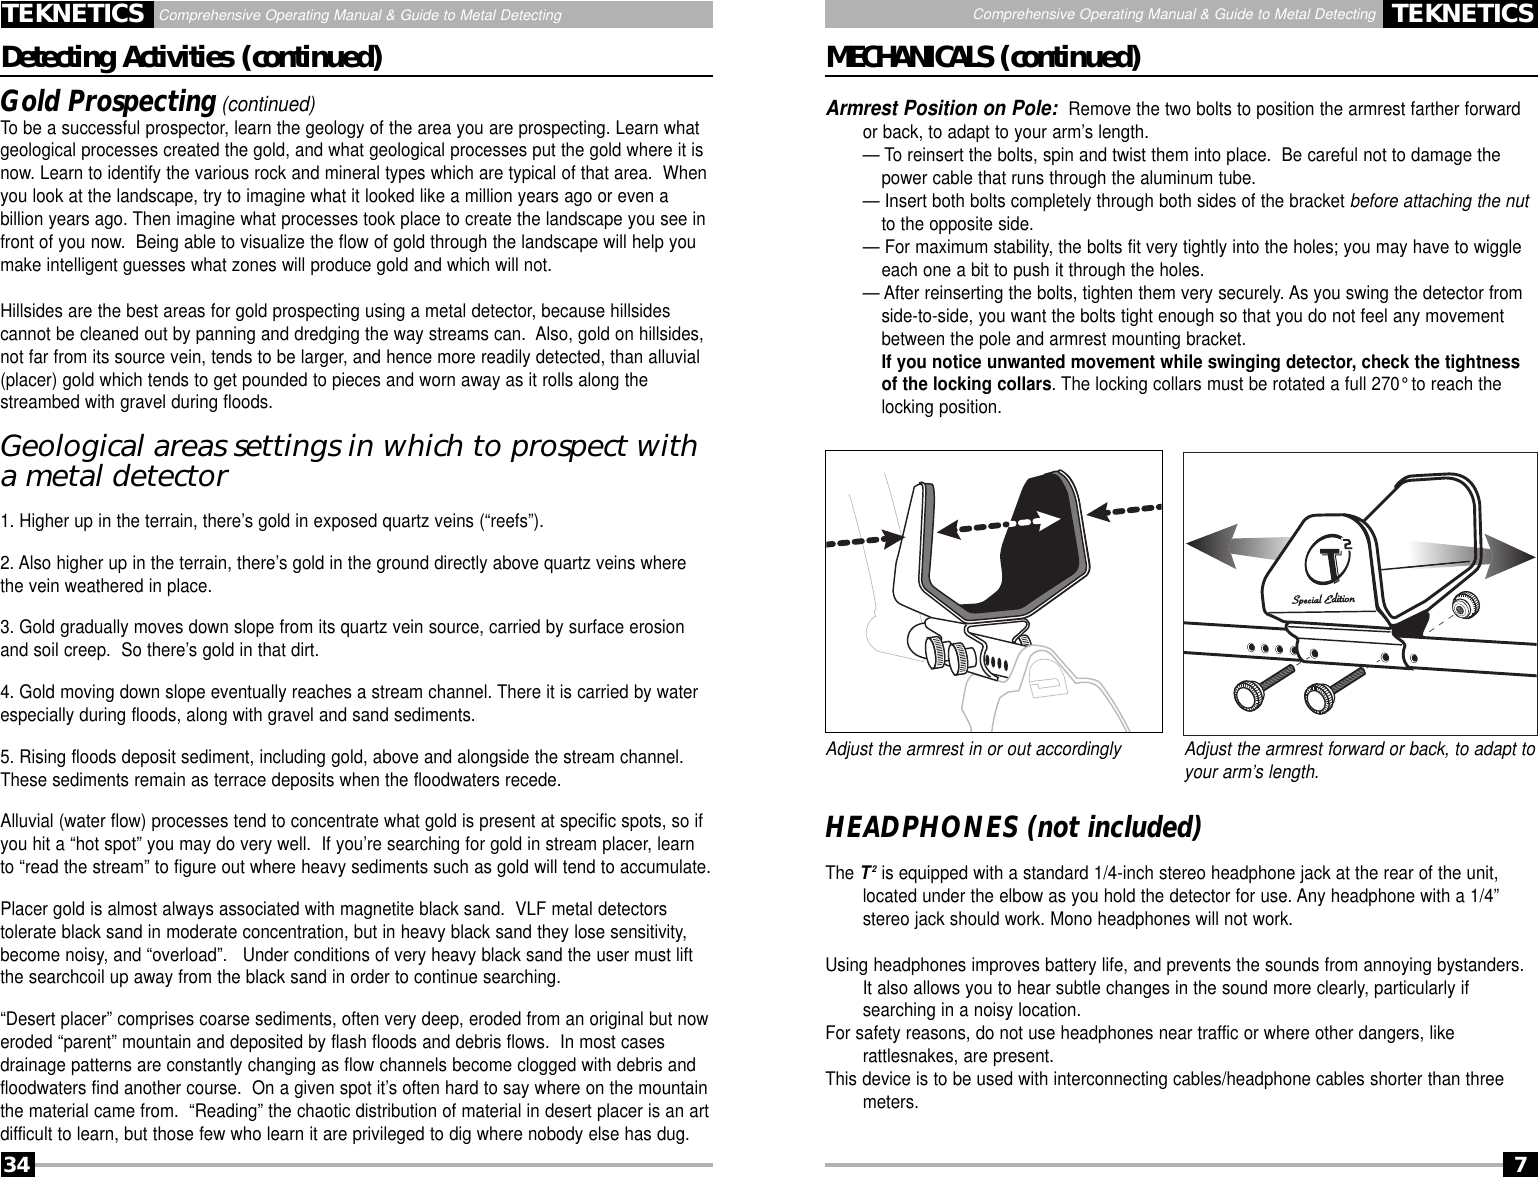 Page 34 of First Texas T2MD Professional Metal Detector User Manual Layout 1